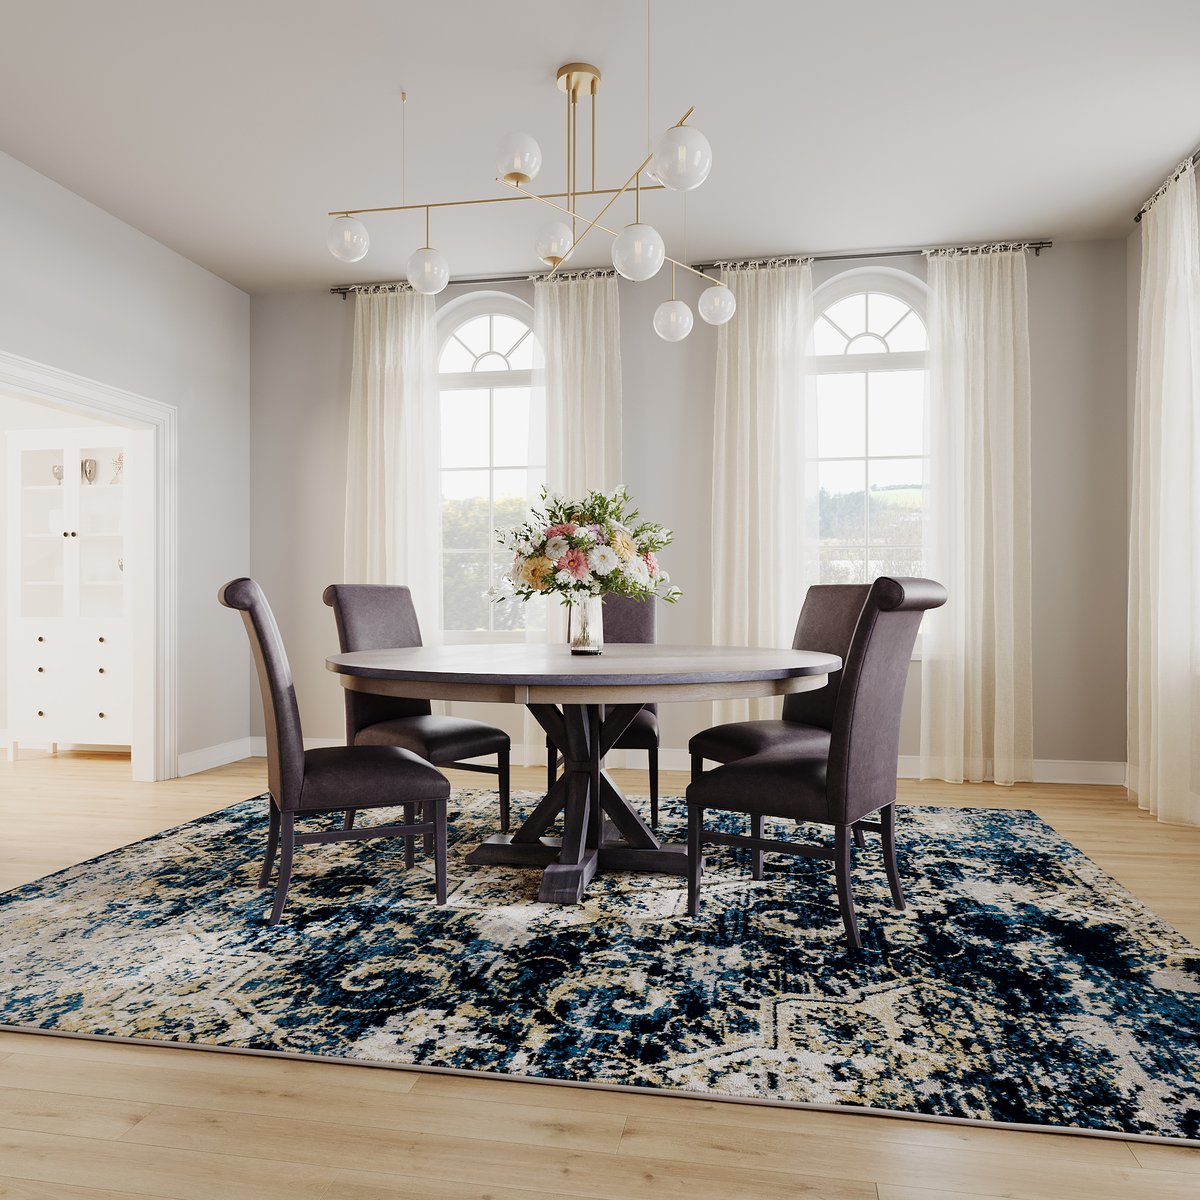 Transform mealtime into magic with the Alberta 72' Antique Slate Round Dining Table at galleryfurniture.biz/4a6R576, and complete your dining haven with the Navy/Ivory 7.10X10.10 rug at galleryfurniture.biz/44LTseB. Plus, with GF's same-day delivery, you won't have to wait to start the…